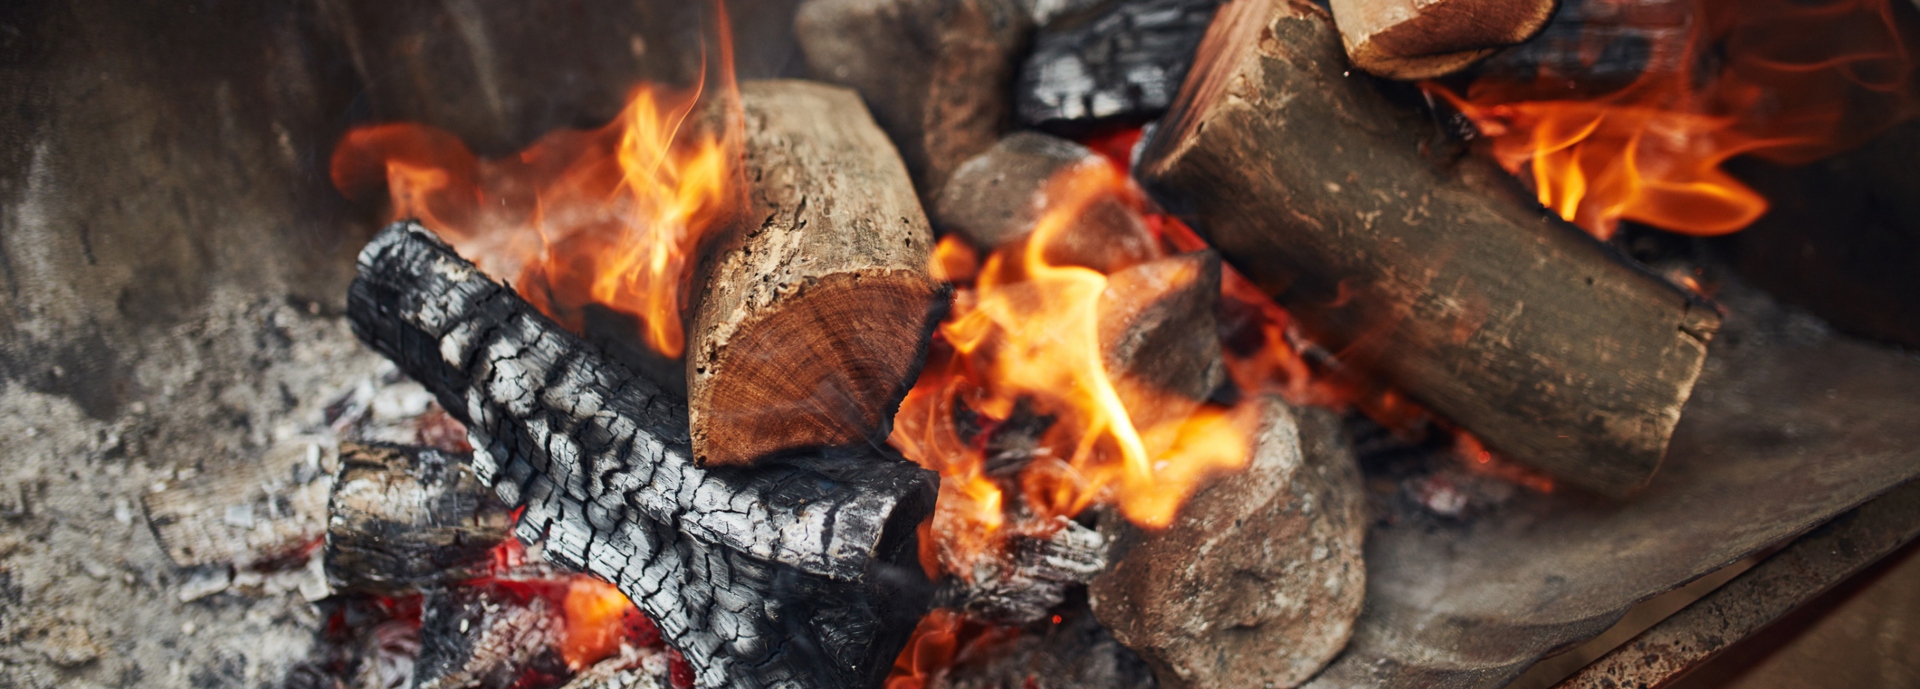 Wooden logs and charcoal fire